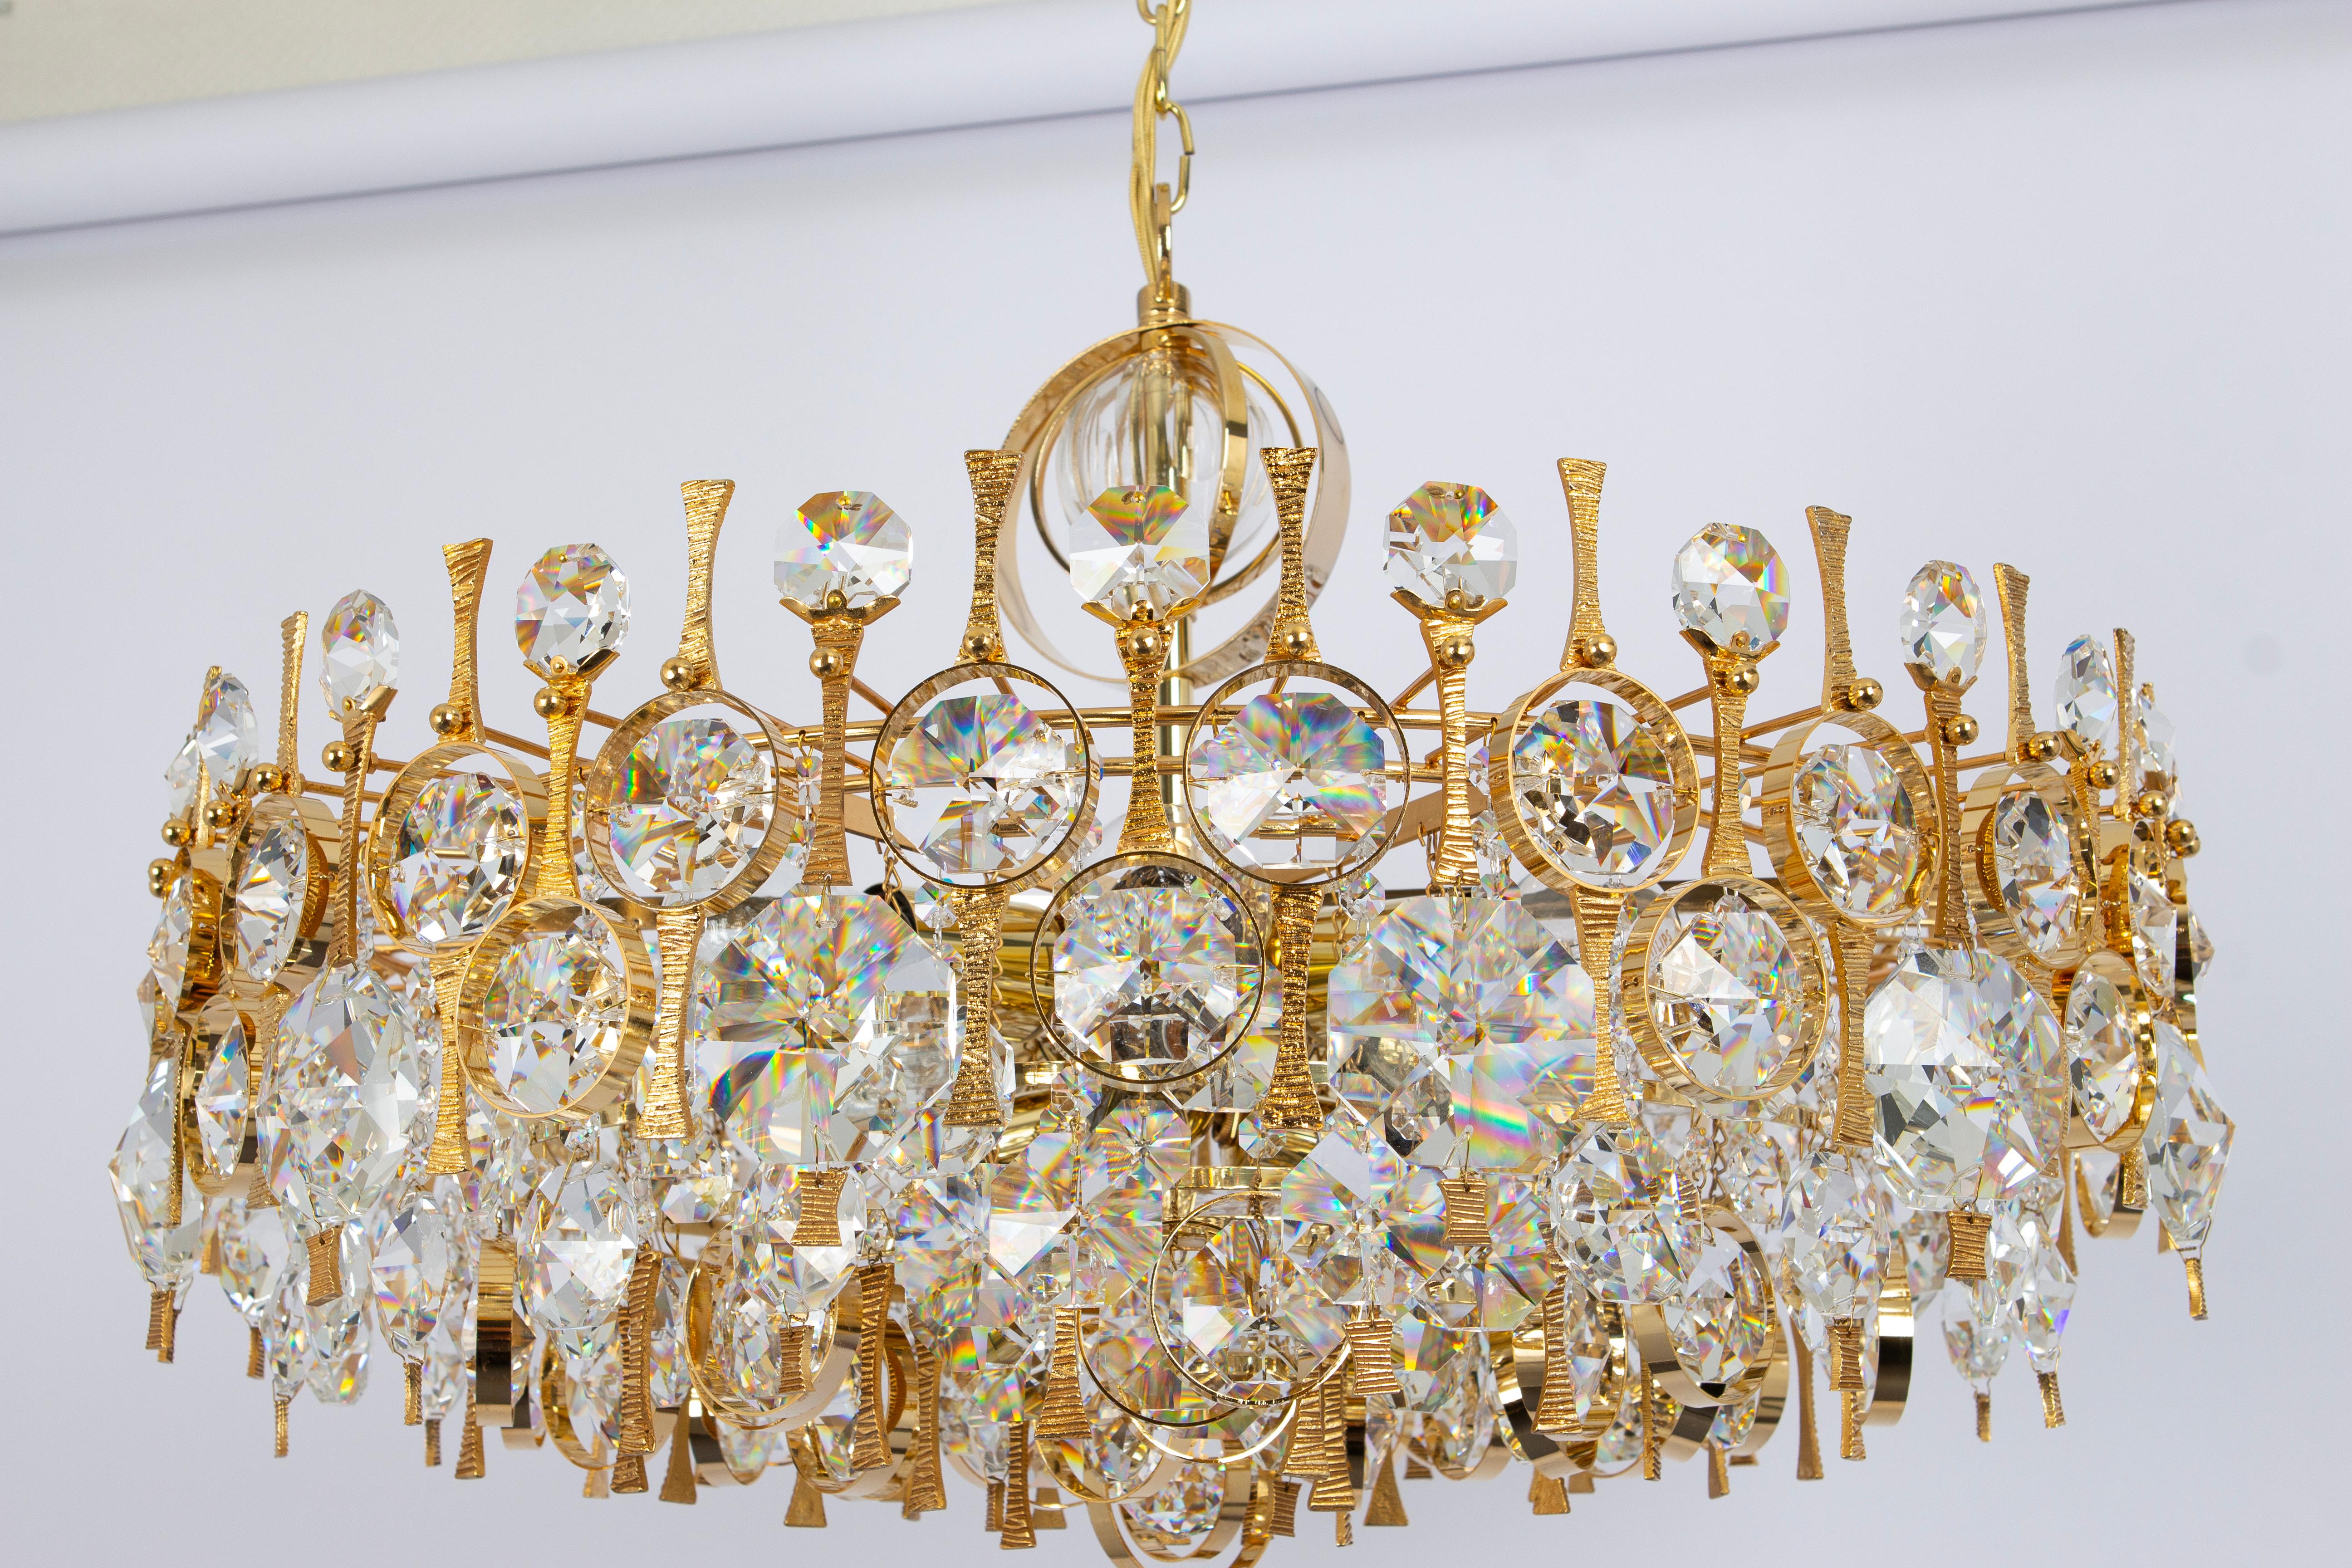 An outstanding and high-quality gilded chandelier or pendant light fixture by Palwa, Germany, 1970s.

It is made of a 24-carat gold-plated brass frame decorated with individual 